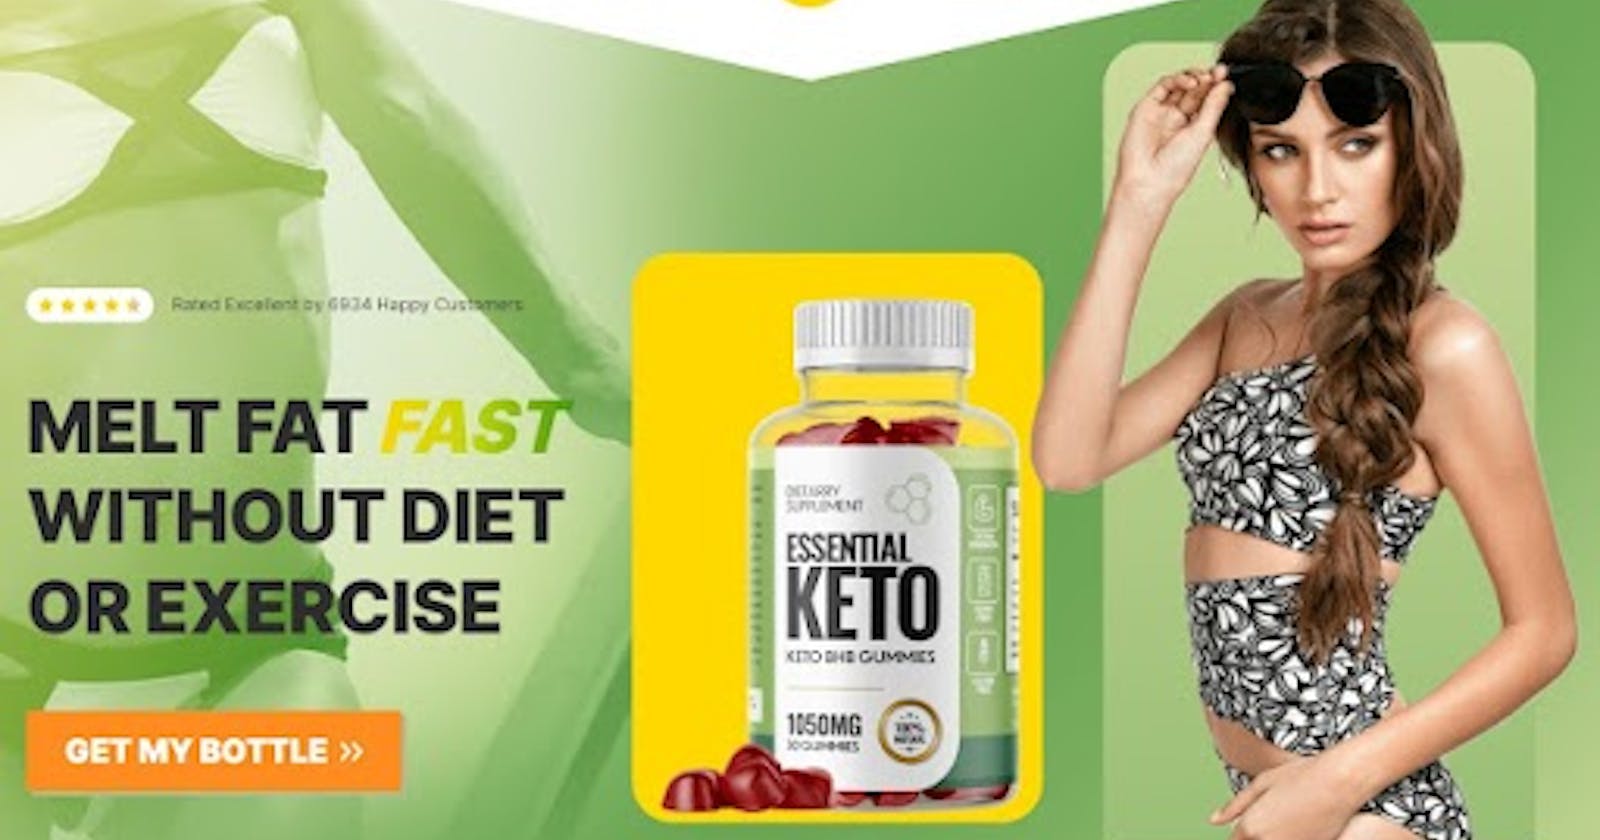 Marriage And Essential Keto Gummies Australia Have More In Common Than You Think